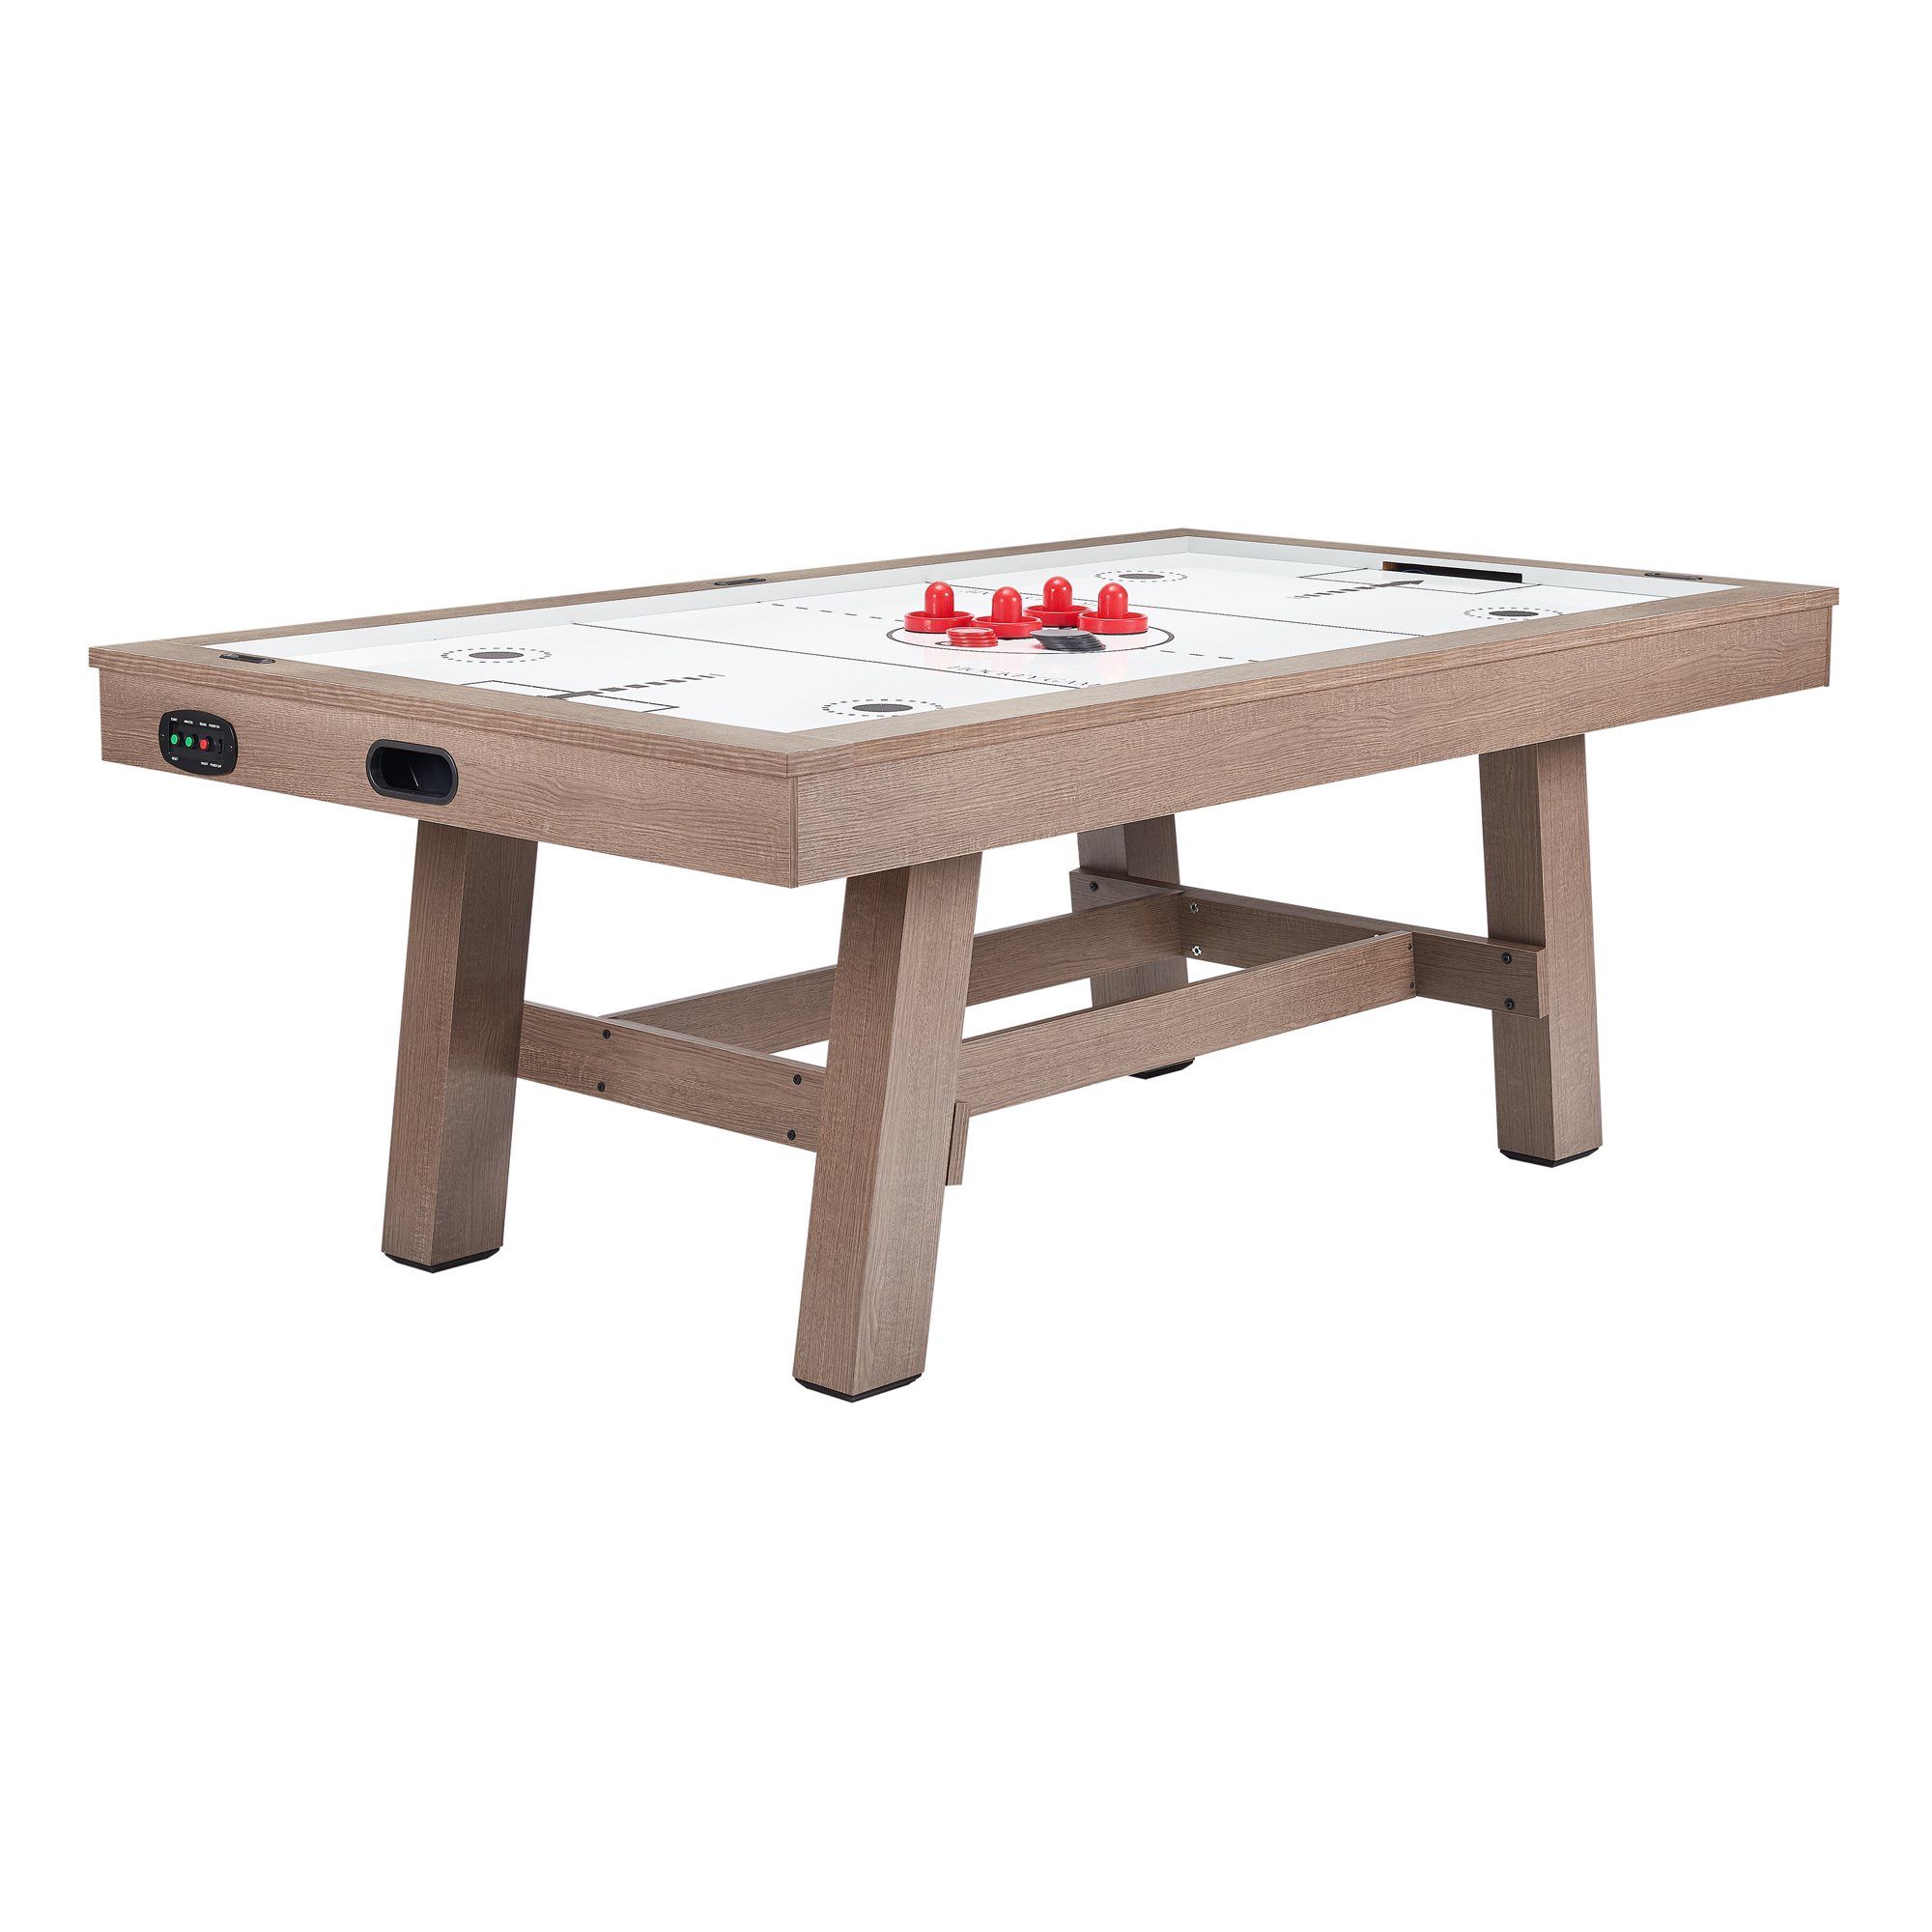 Airzone Premium Air Hockey Table with High End Blower, 84", Wood Finish